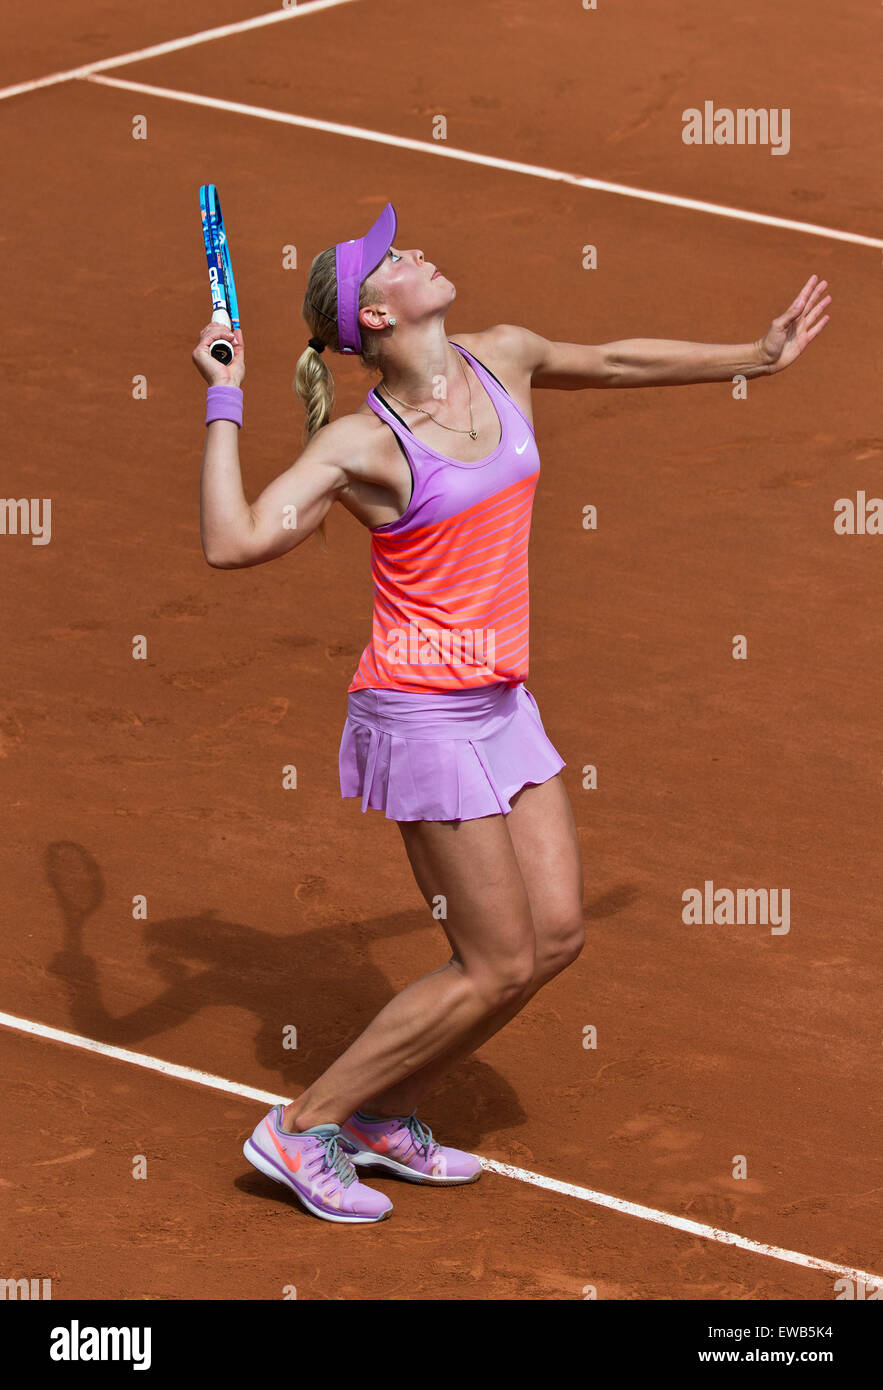 Carina Witthoeft (GER) in action at the French Open 2015 Stock Photo